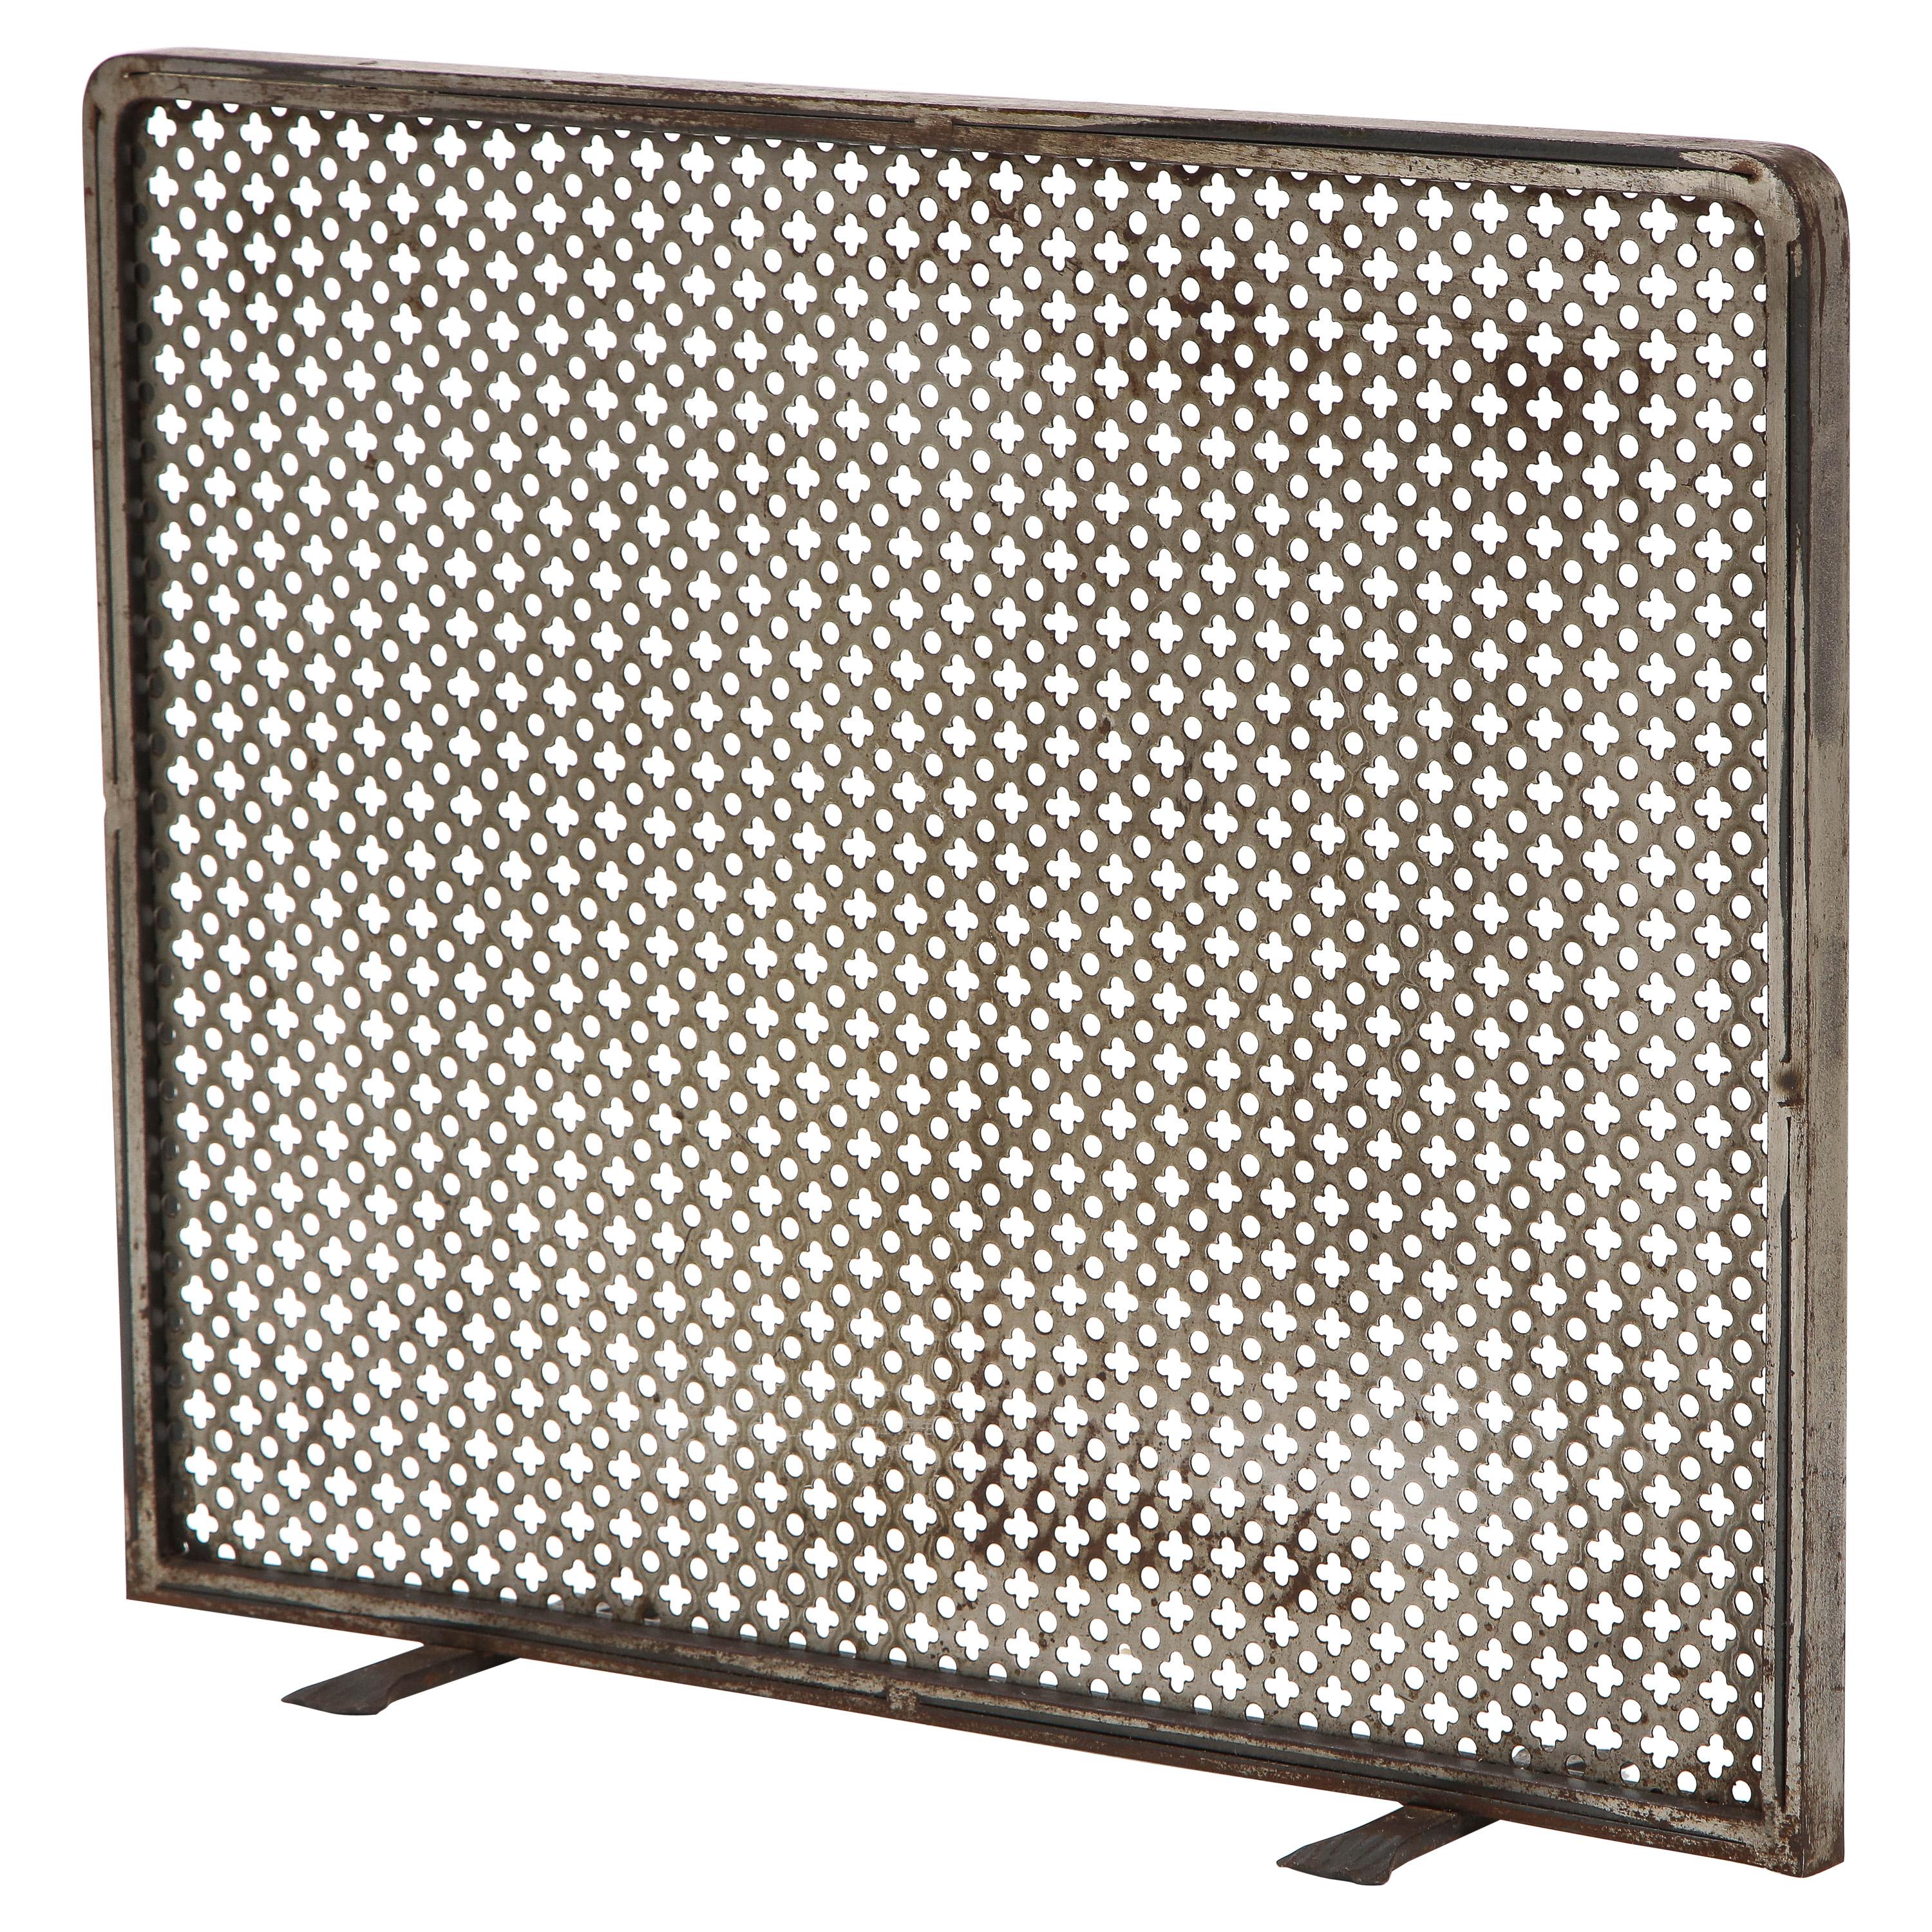 Metal Fireplace Screen in the Style of Mathieu Matégot, French, c. 1950